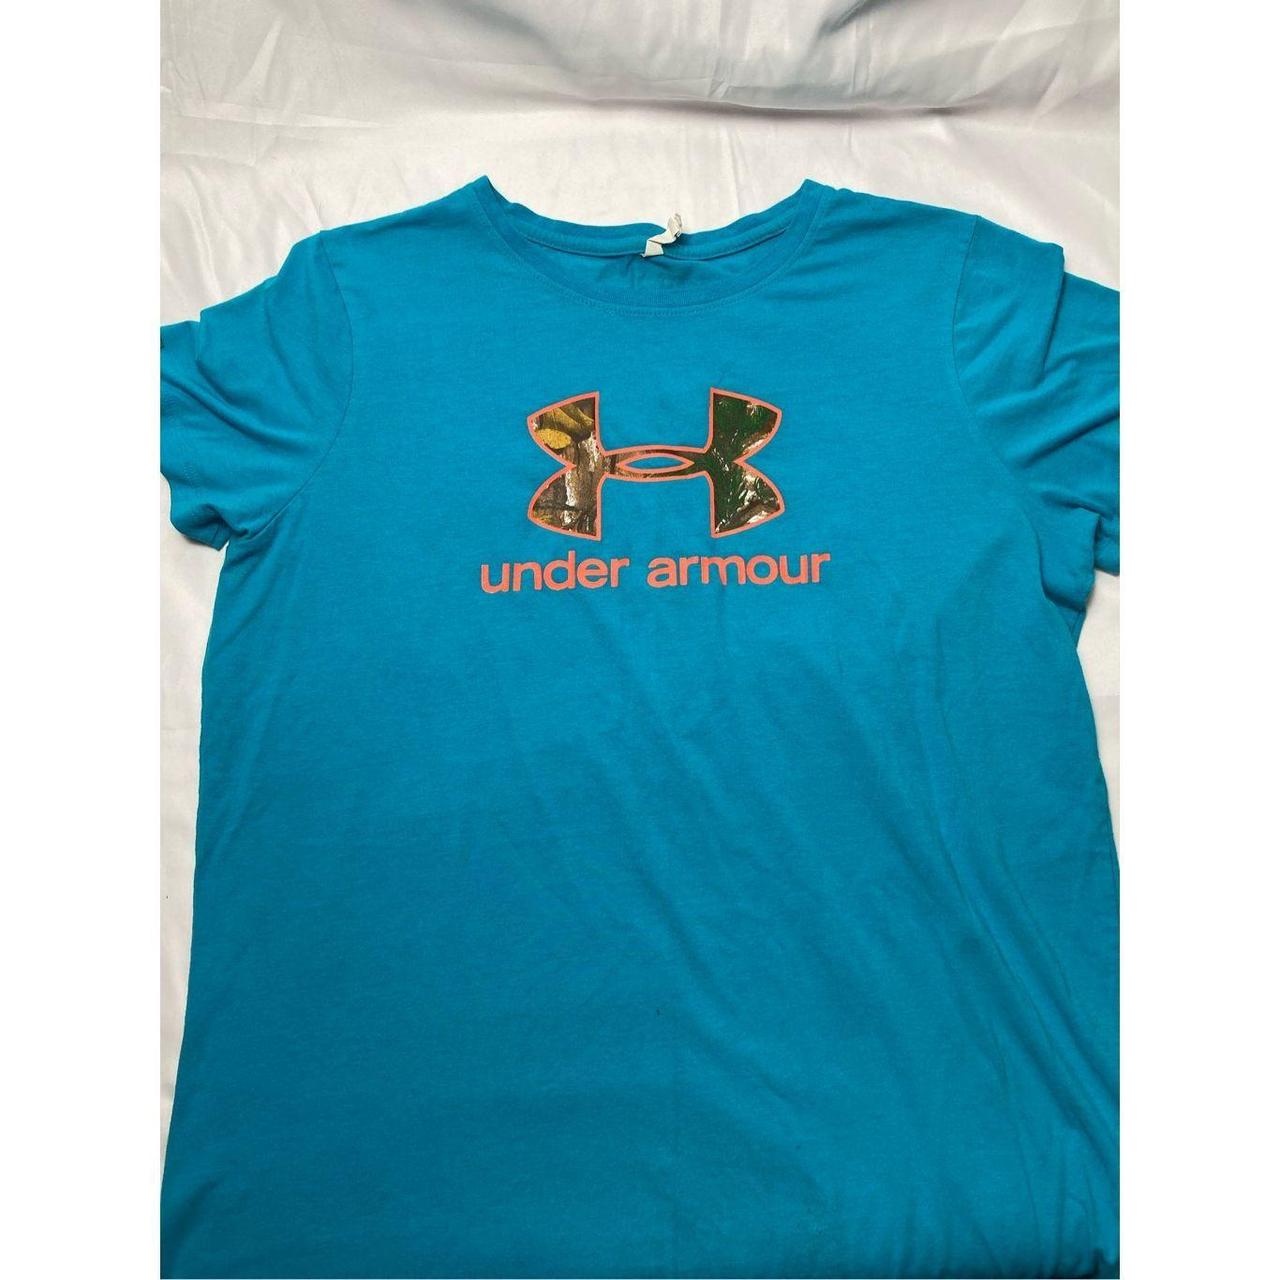 Under Armour Blue T-shirt with Camouflage Logo Sz... - Depop